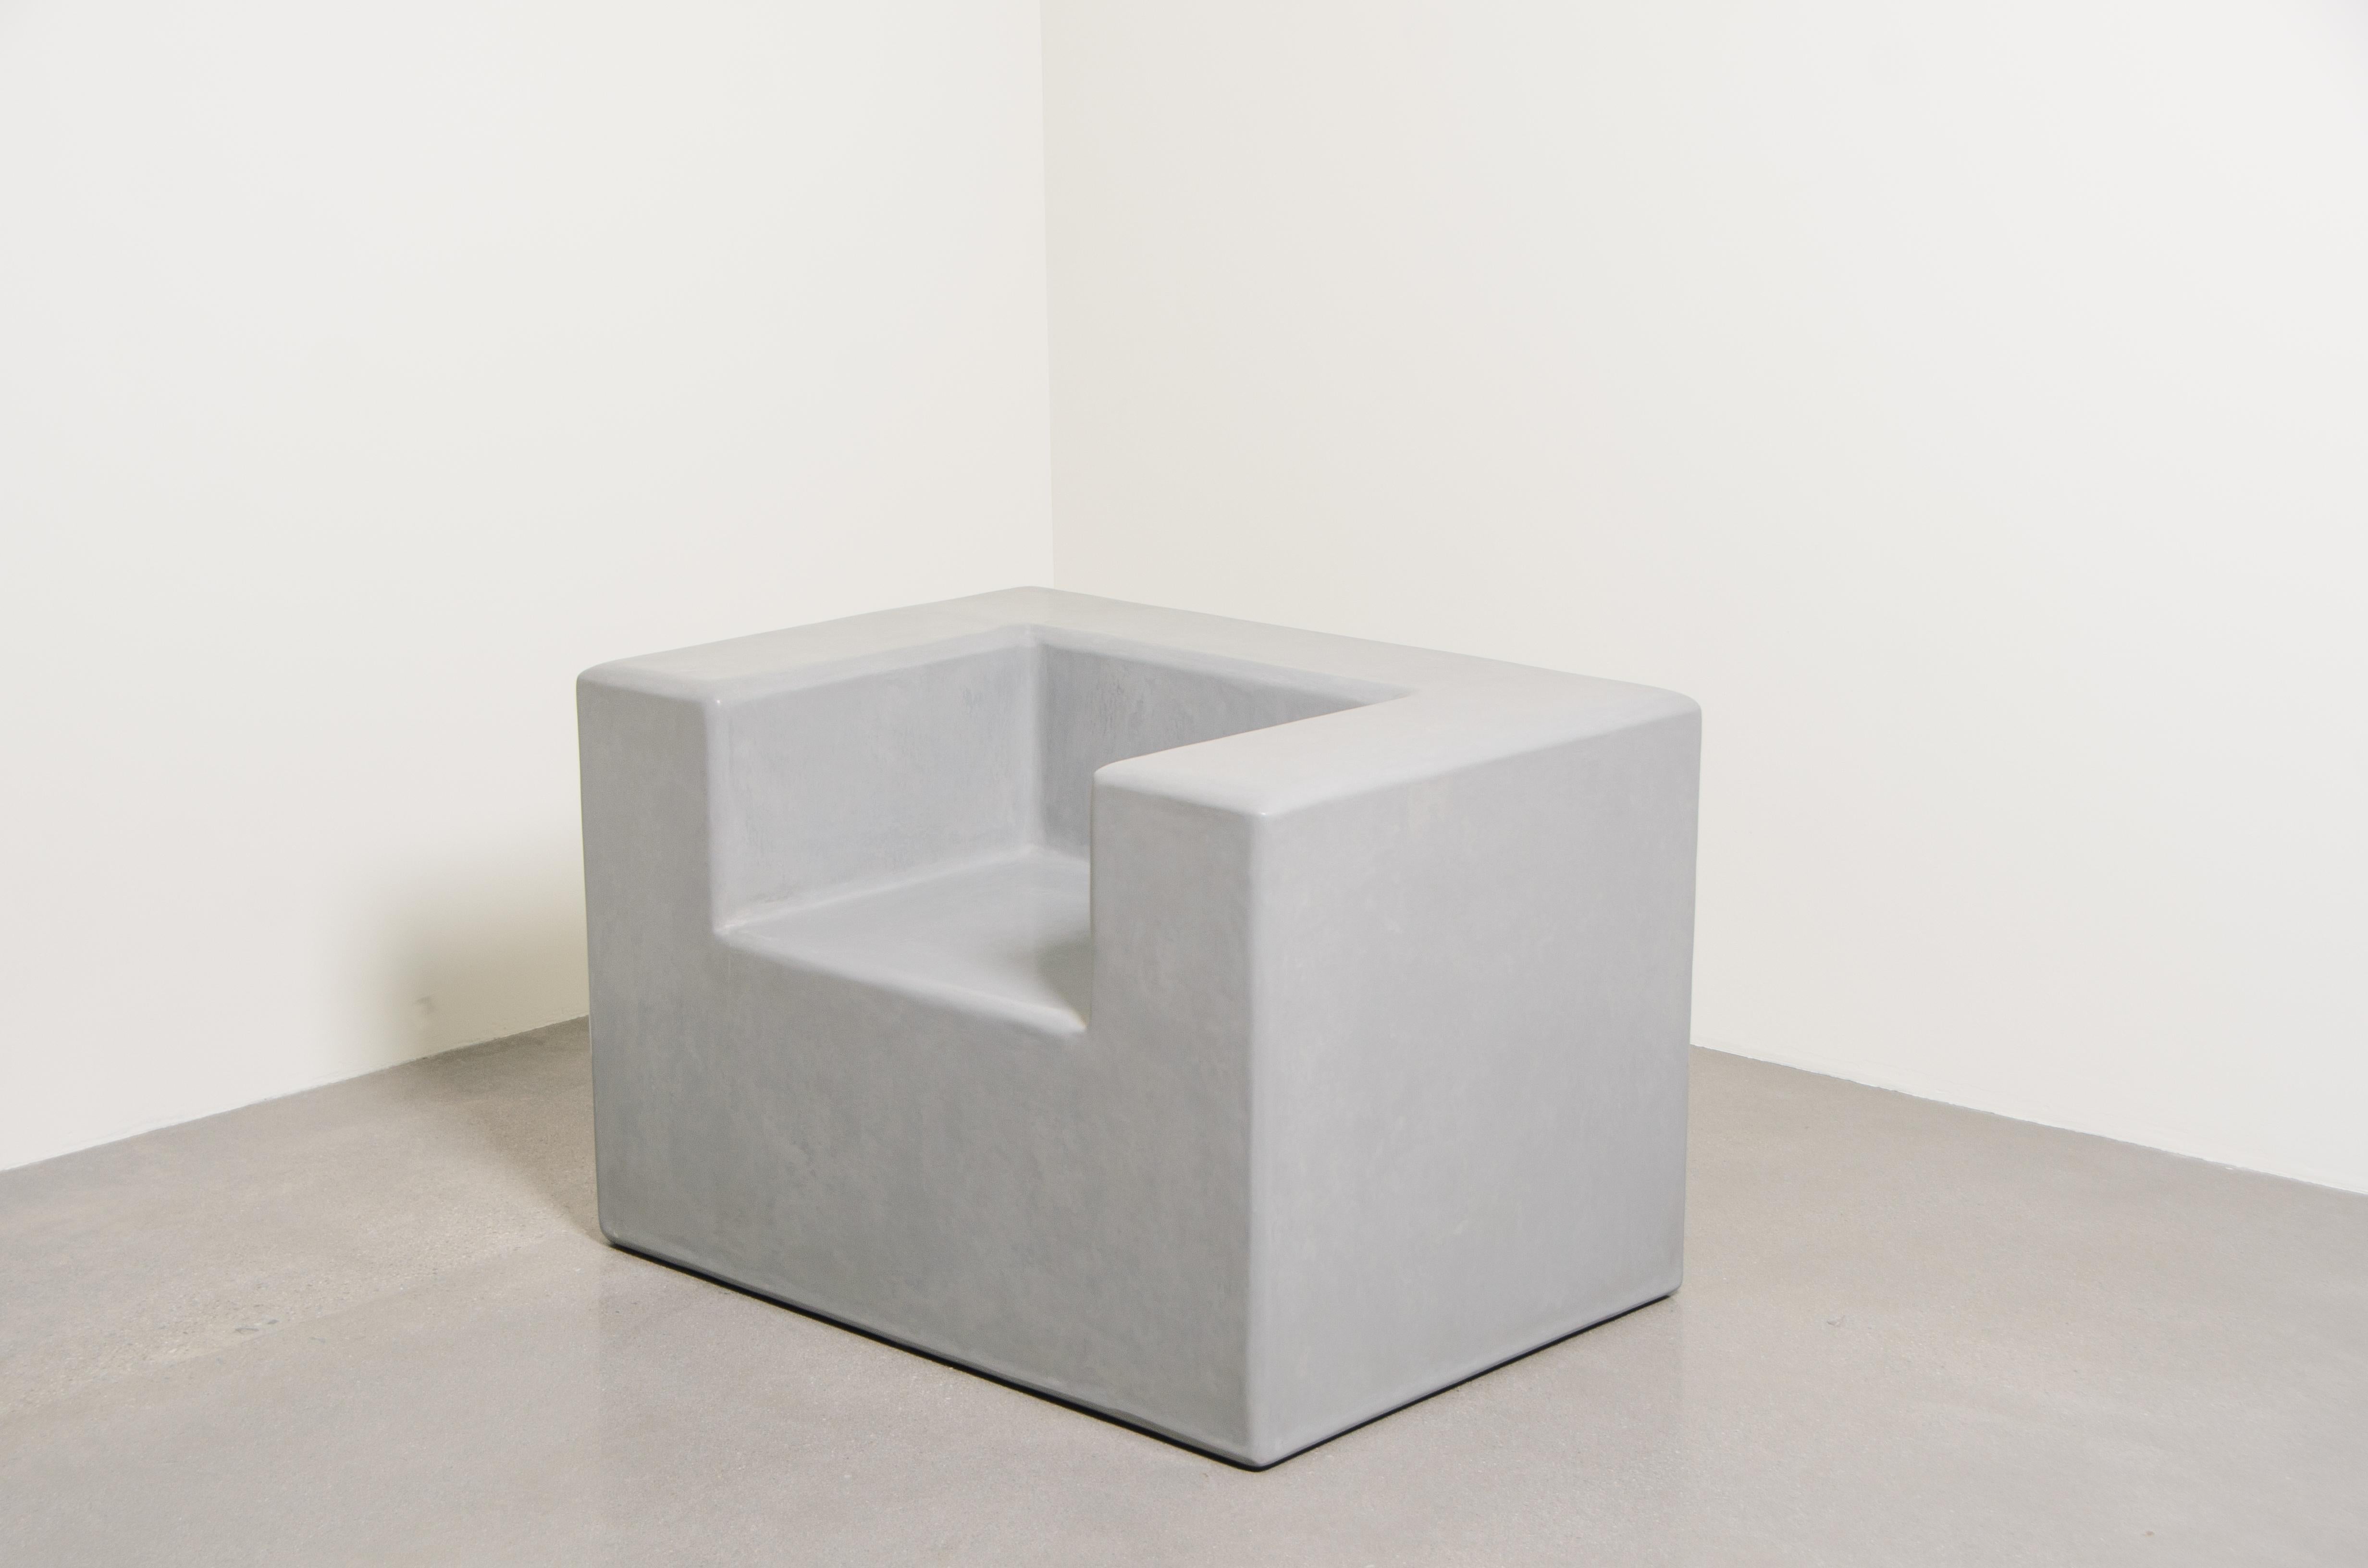 Minimalist Contemporary Arm Rest Chair in Grey Lacquer by Robert Kuo, Limited Edition For Sale